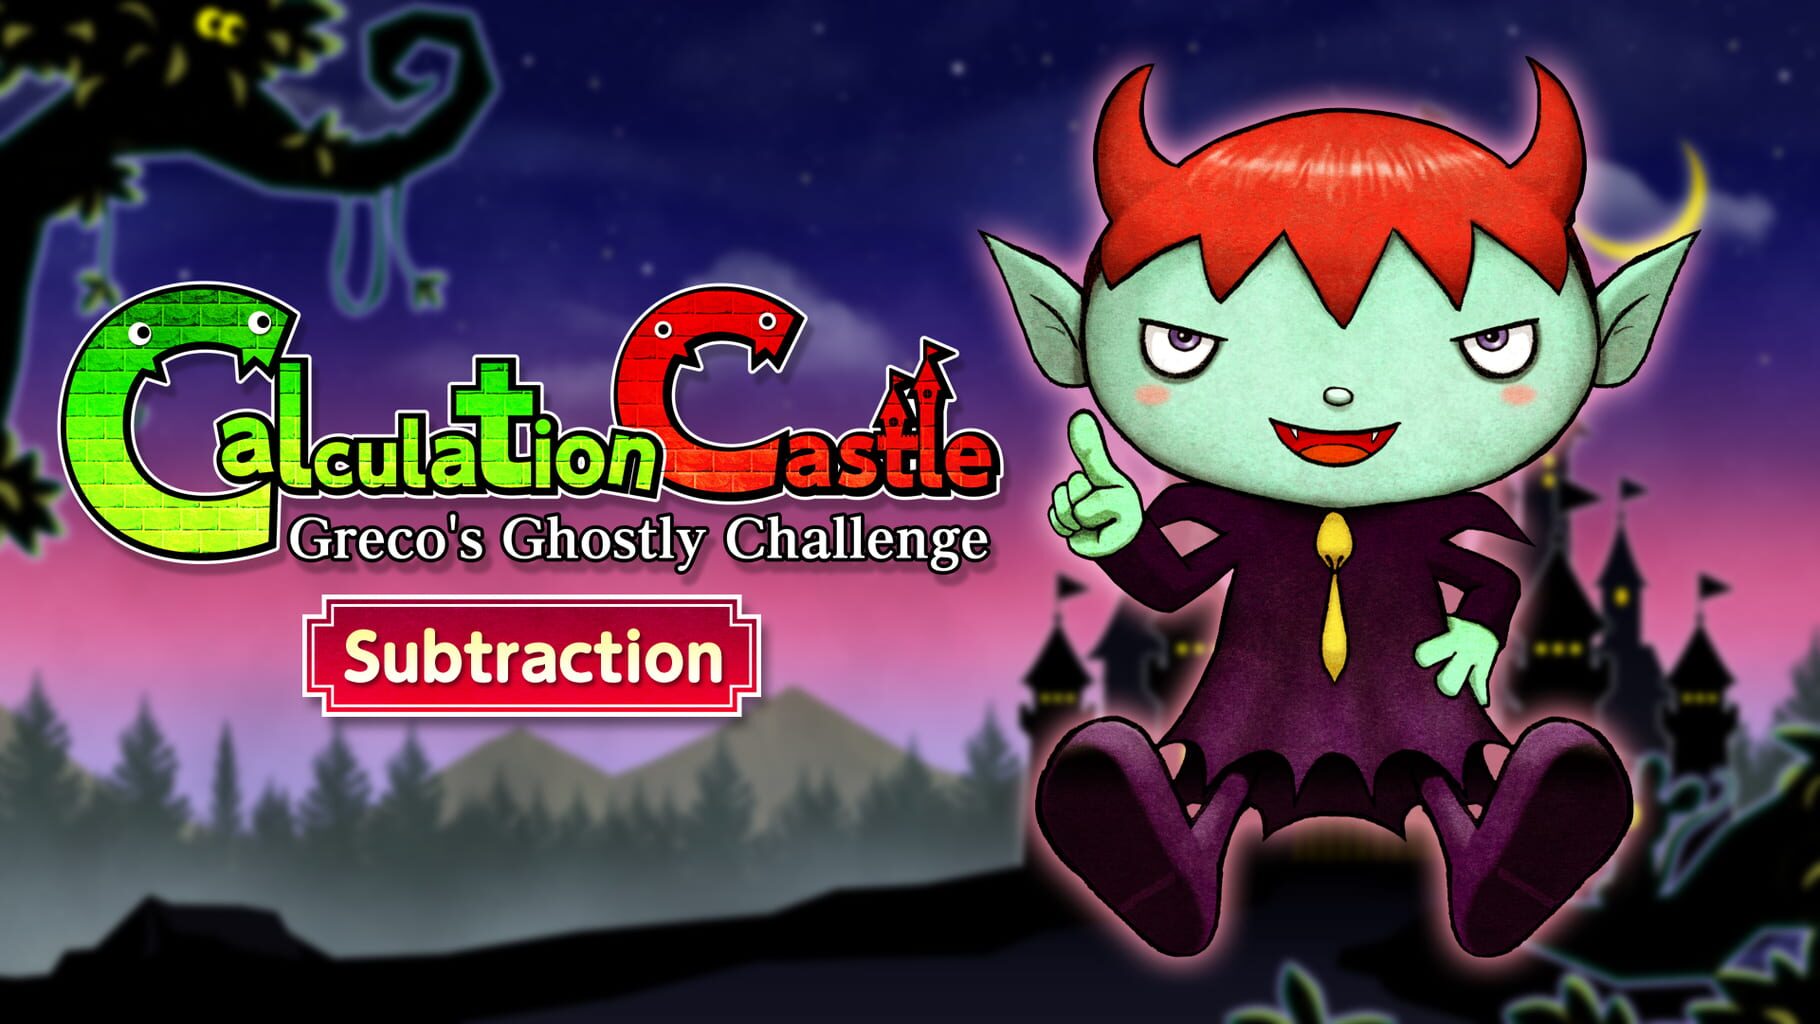 Calculation Castle: Greco's Ghostly Challenge "Subtraction" artwork